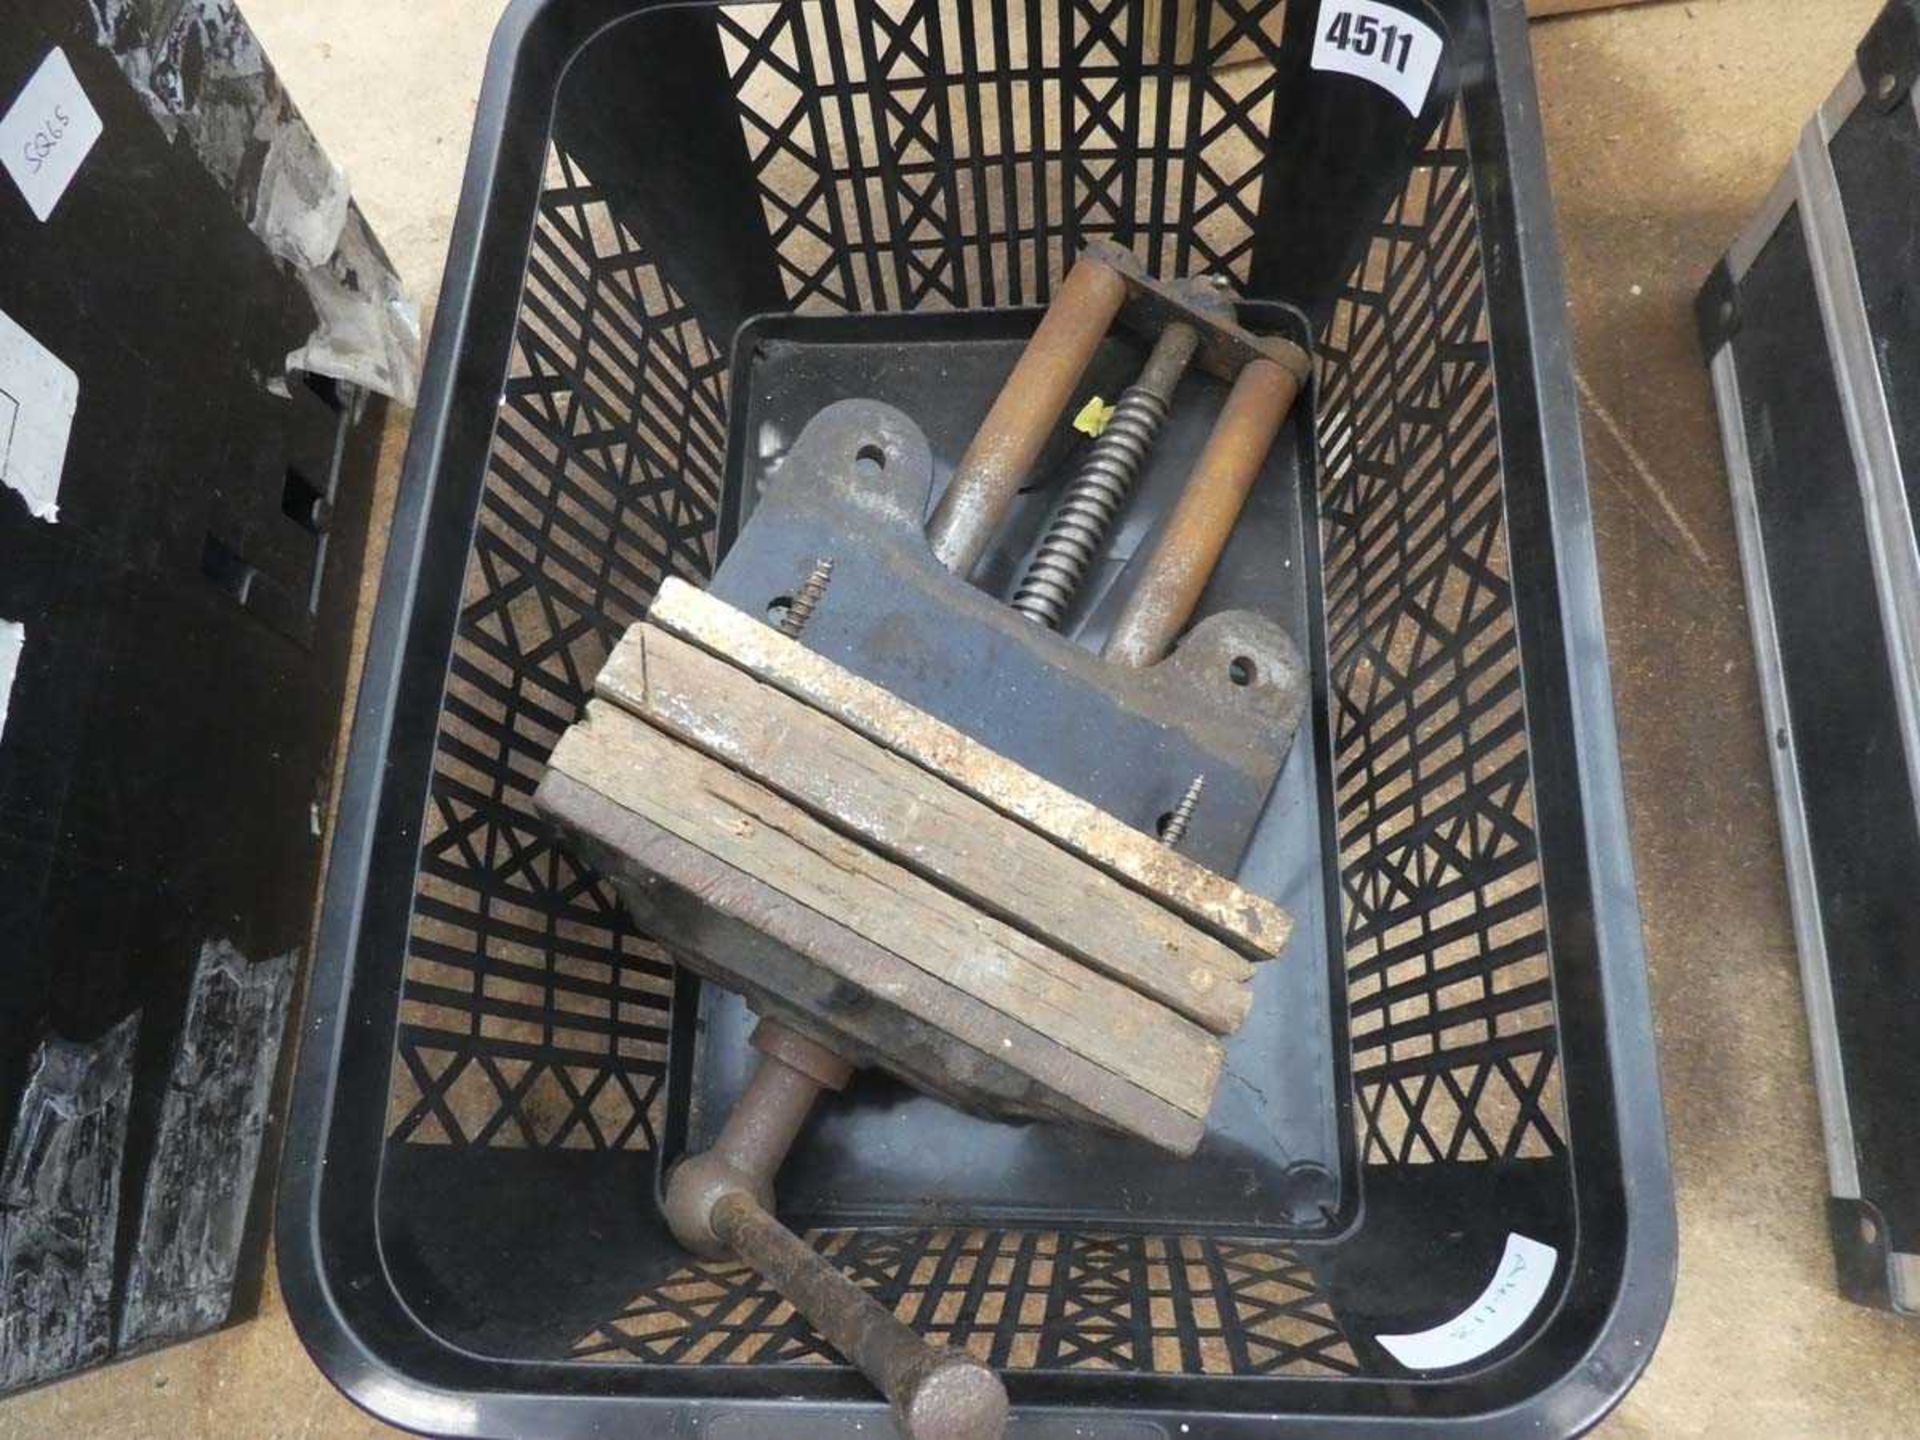 Small woodworking vice in a basket